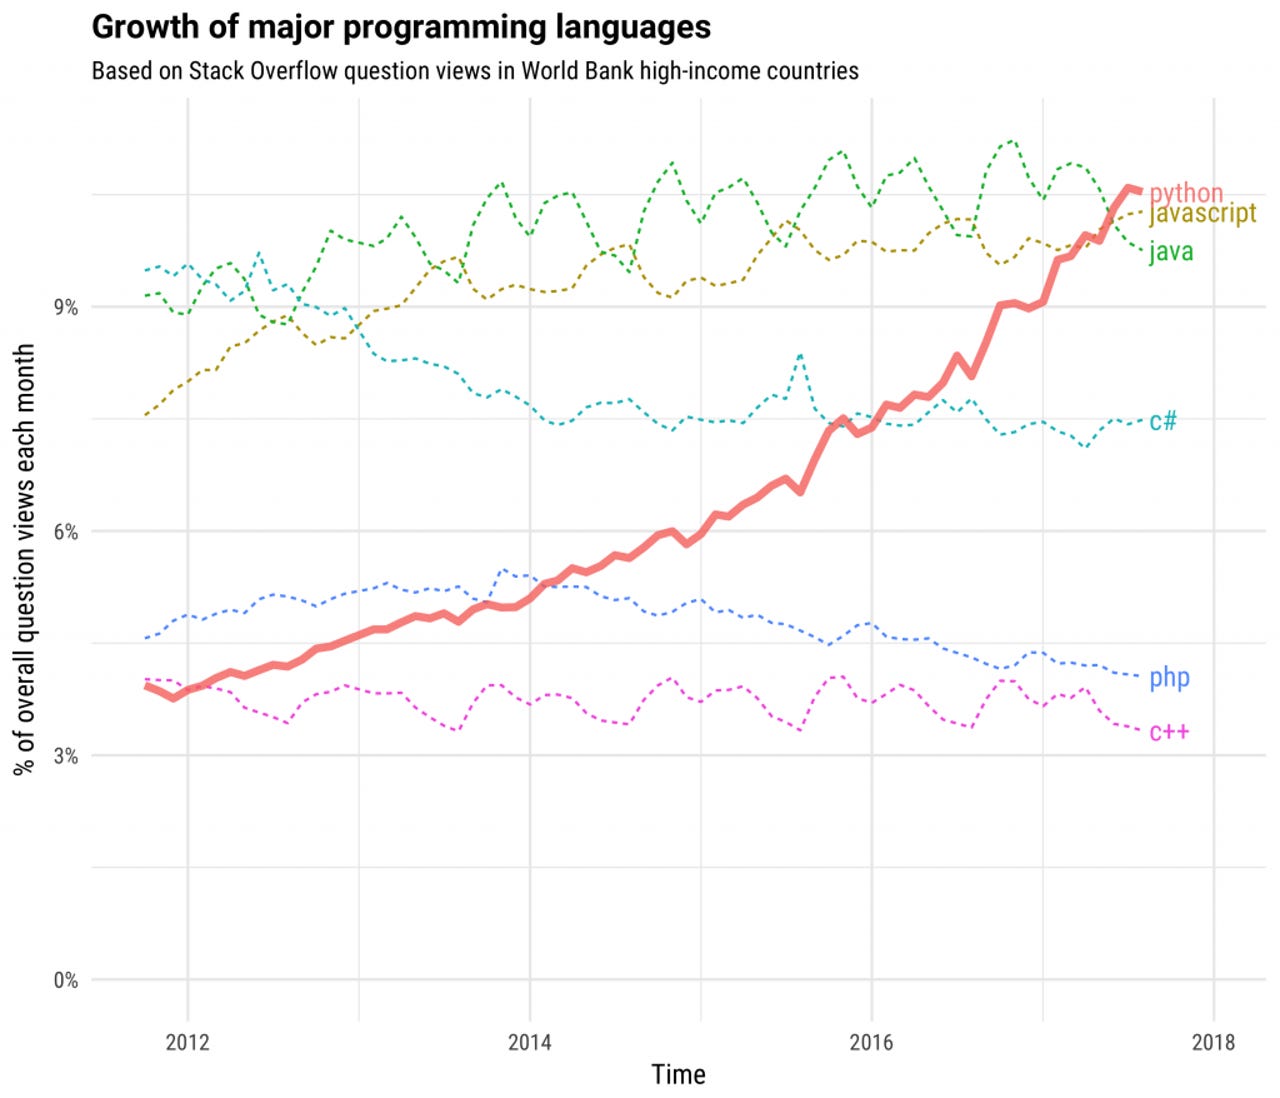 growthmajorlanguages-1-1024x878.png